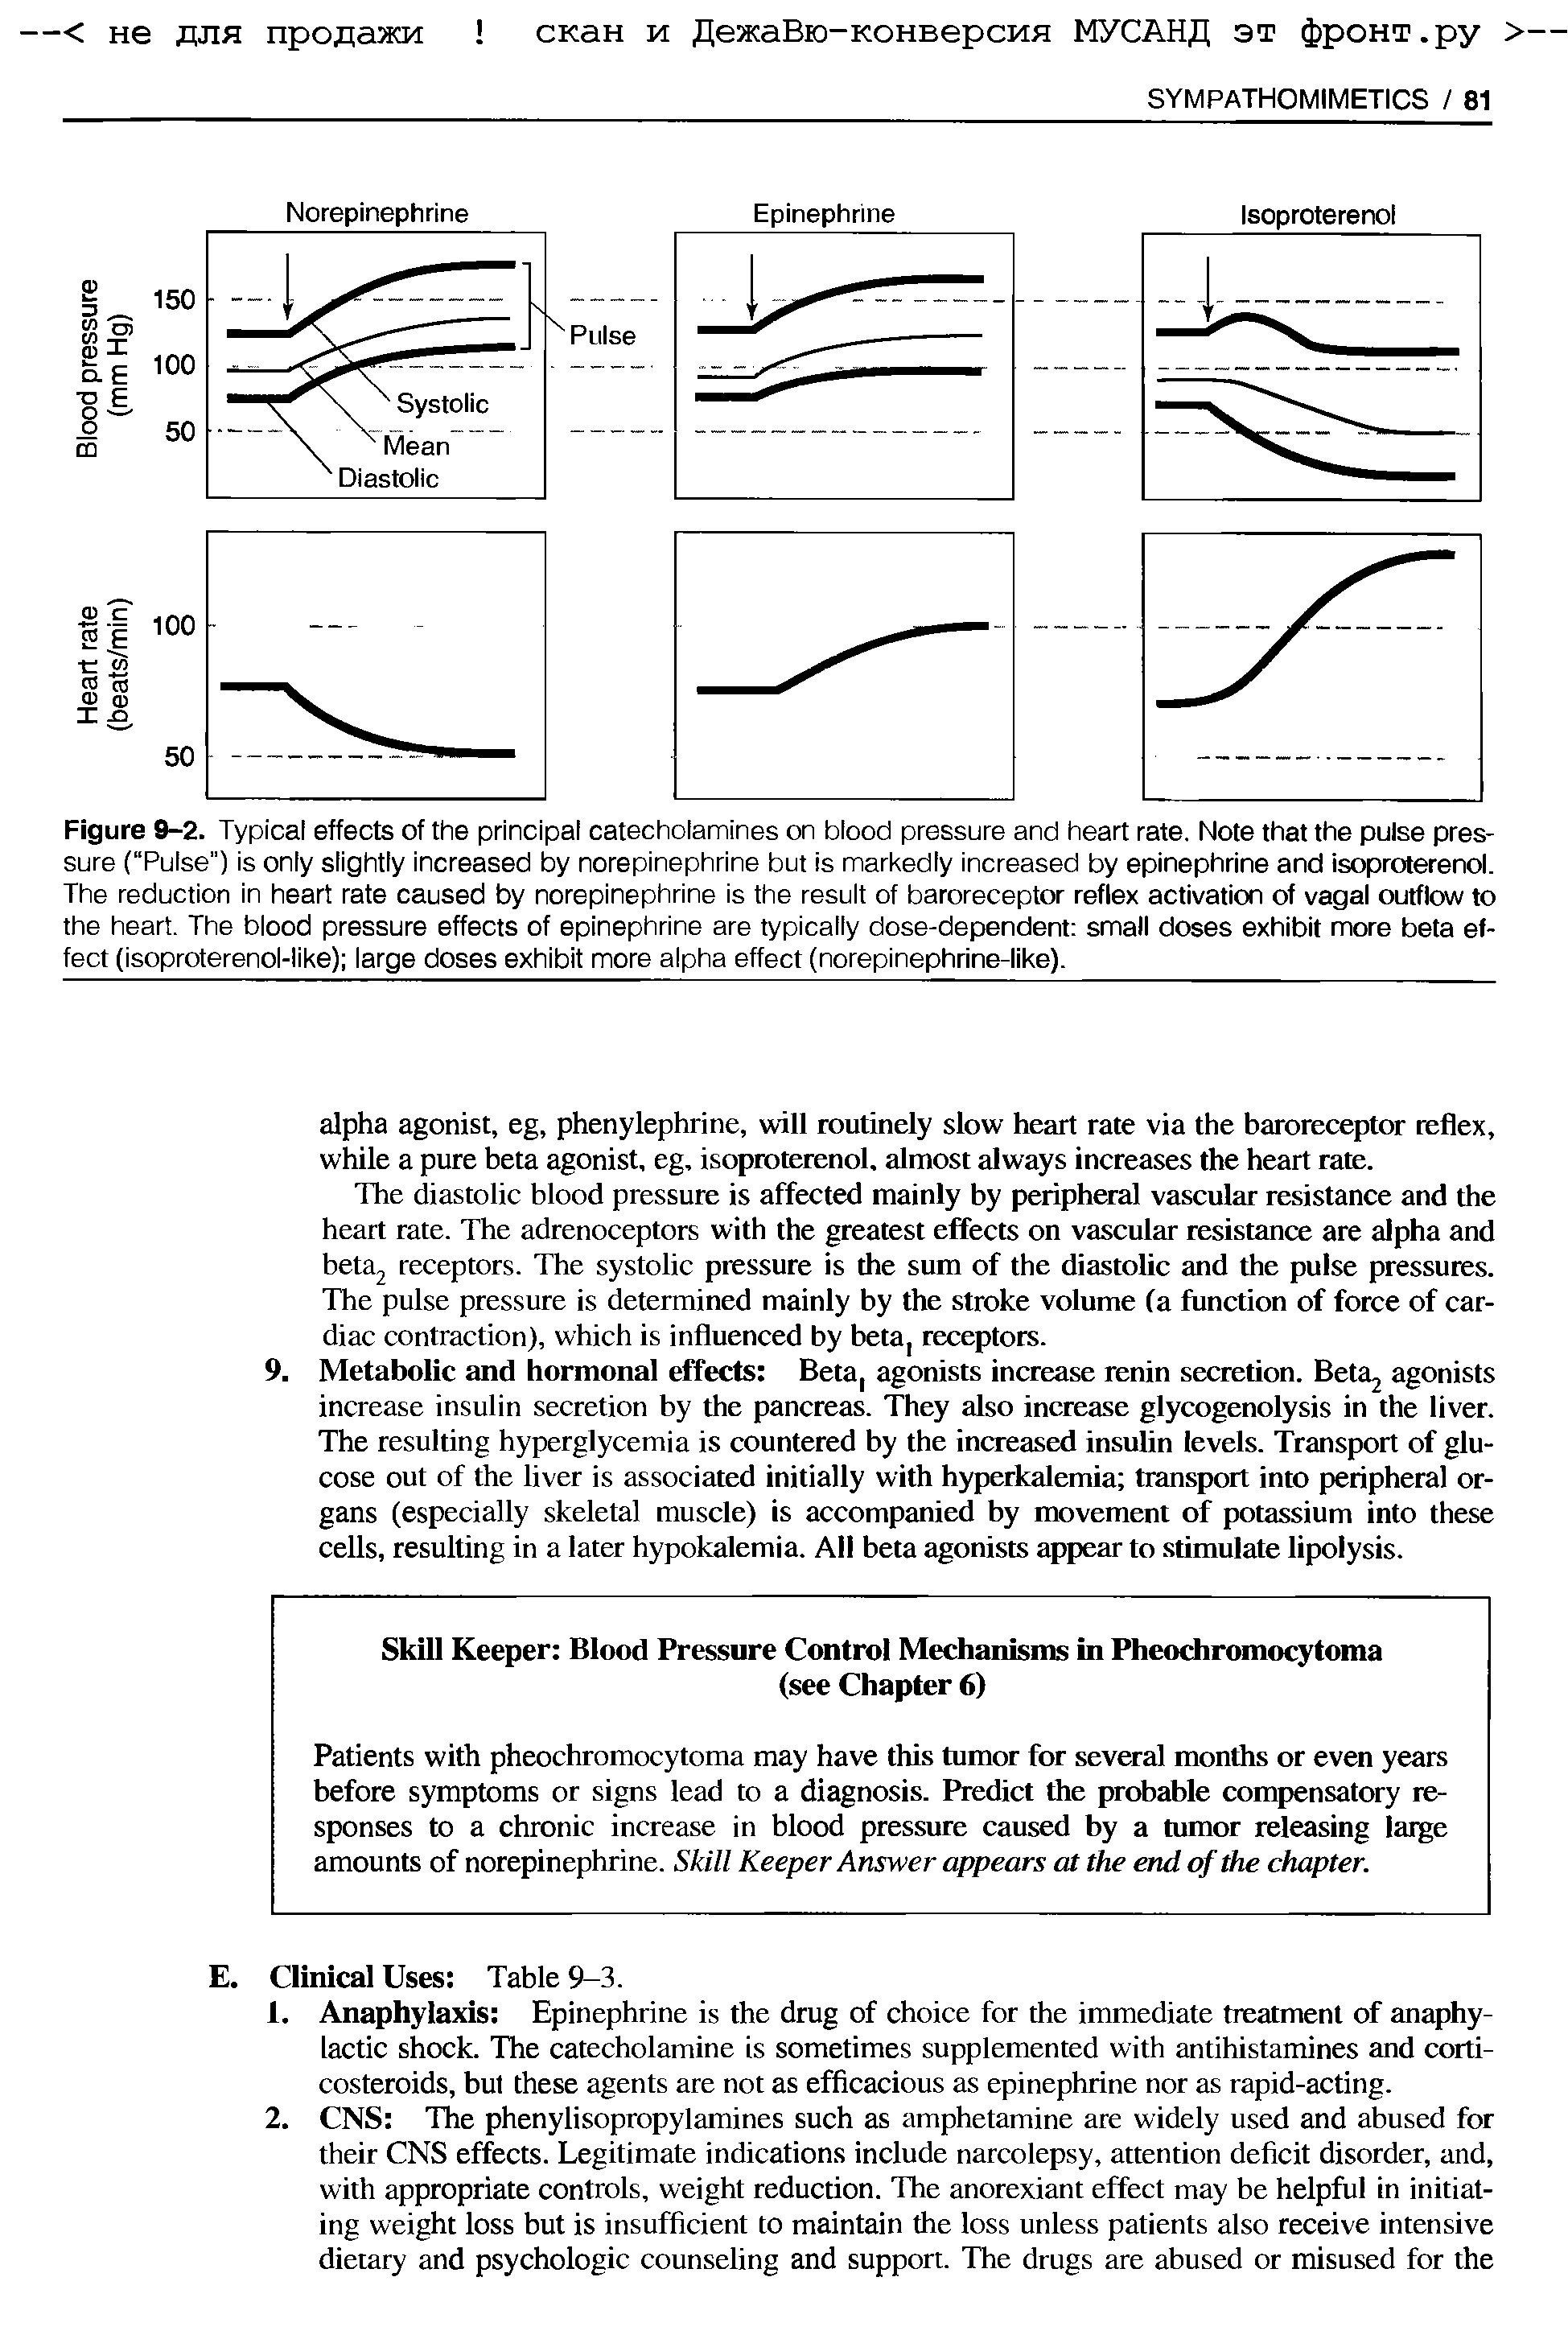 Figure 9-2. Typical effects of the principal catecholamines on blood pressure and heart rate. Note that the pulse pressure ( Pulse ) is only slightly increased by norepinephrine but is markedly increased by epinephrine and isoproterenol. The reduction in heart rate caused by norepinephrine is the result of baroreceptor reflex activation of vagal outflow to the heart. The blood pressure effects of epinephrine are typically dose-dependent small doses exhibit more beta effect (isoproterenol-like) large doses exhibit more alpha effect (norepinephrine-like).